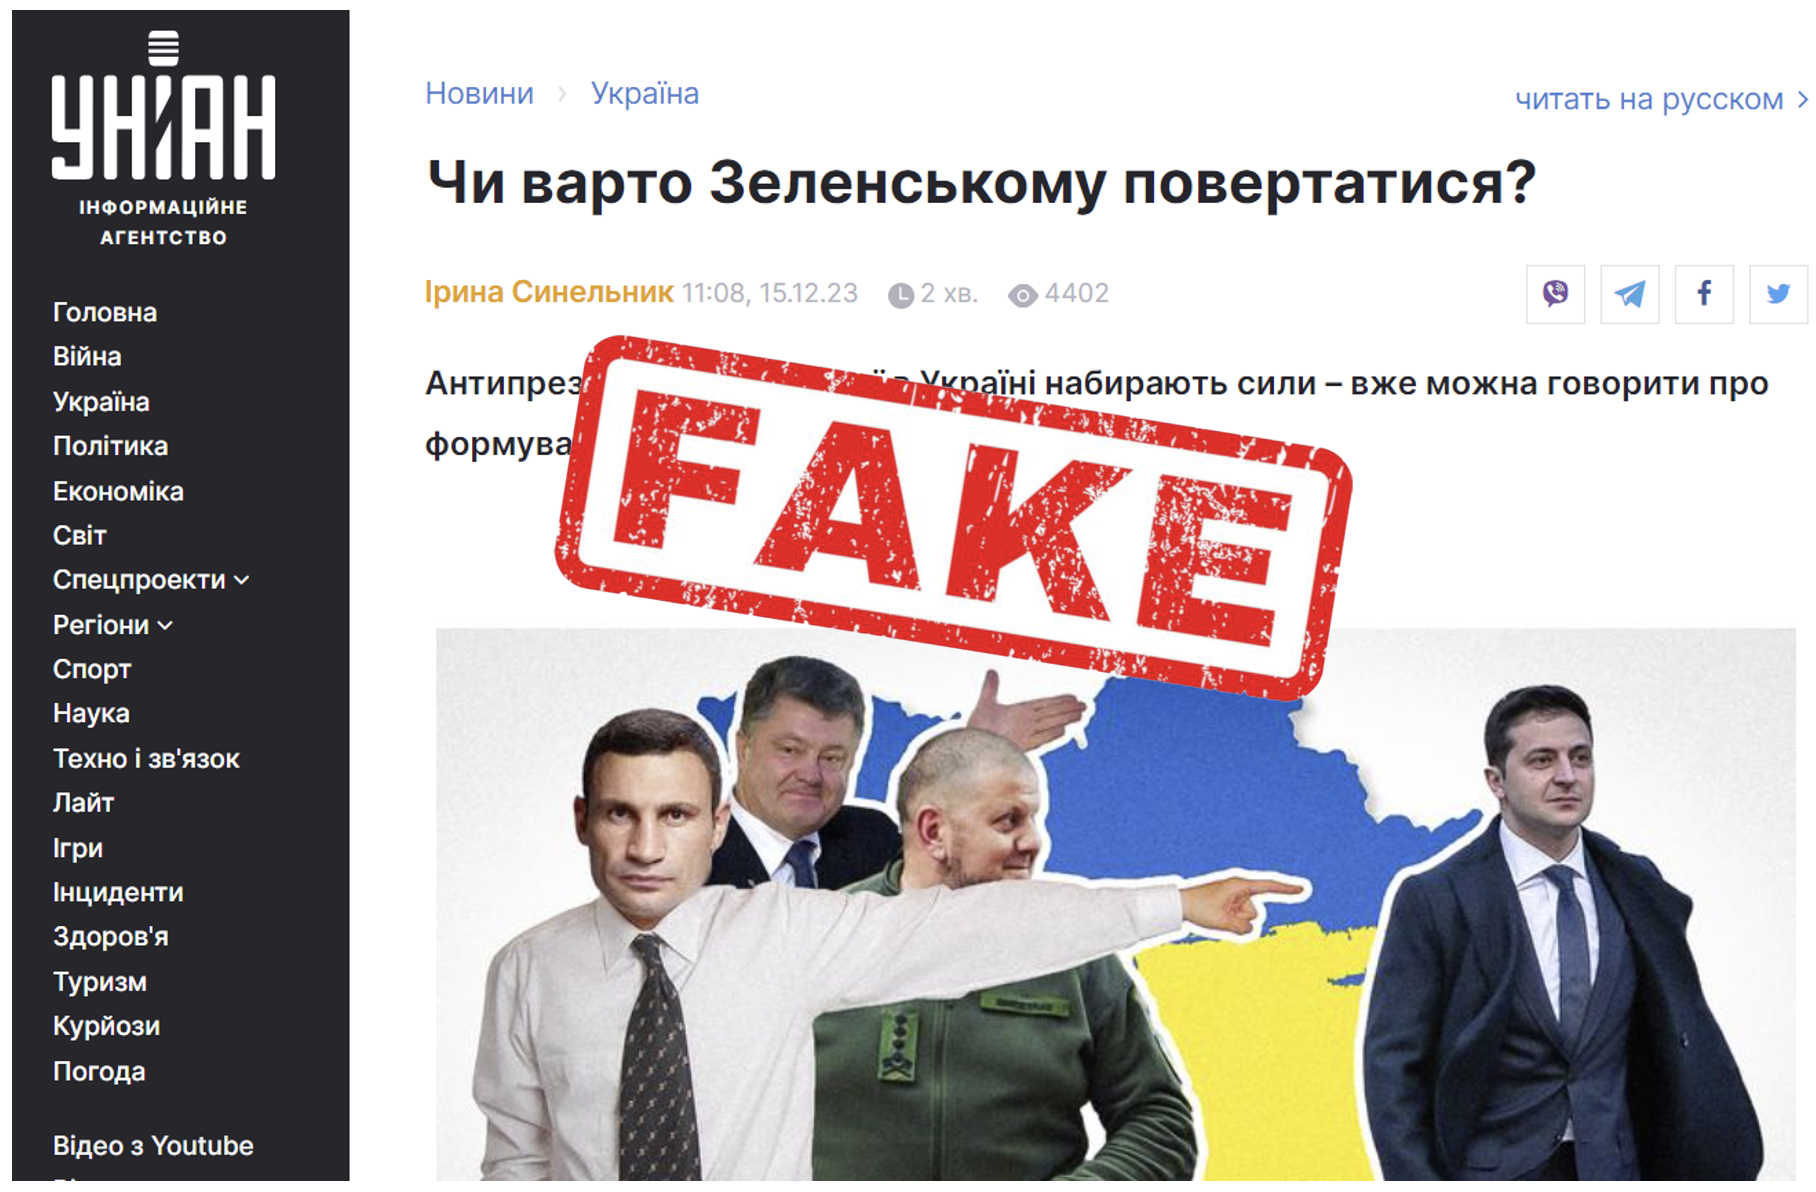 Doppelganger targets Ukrainian and French  audiences via Facebook ads